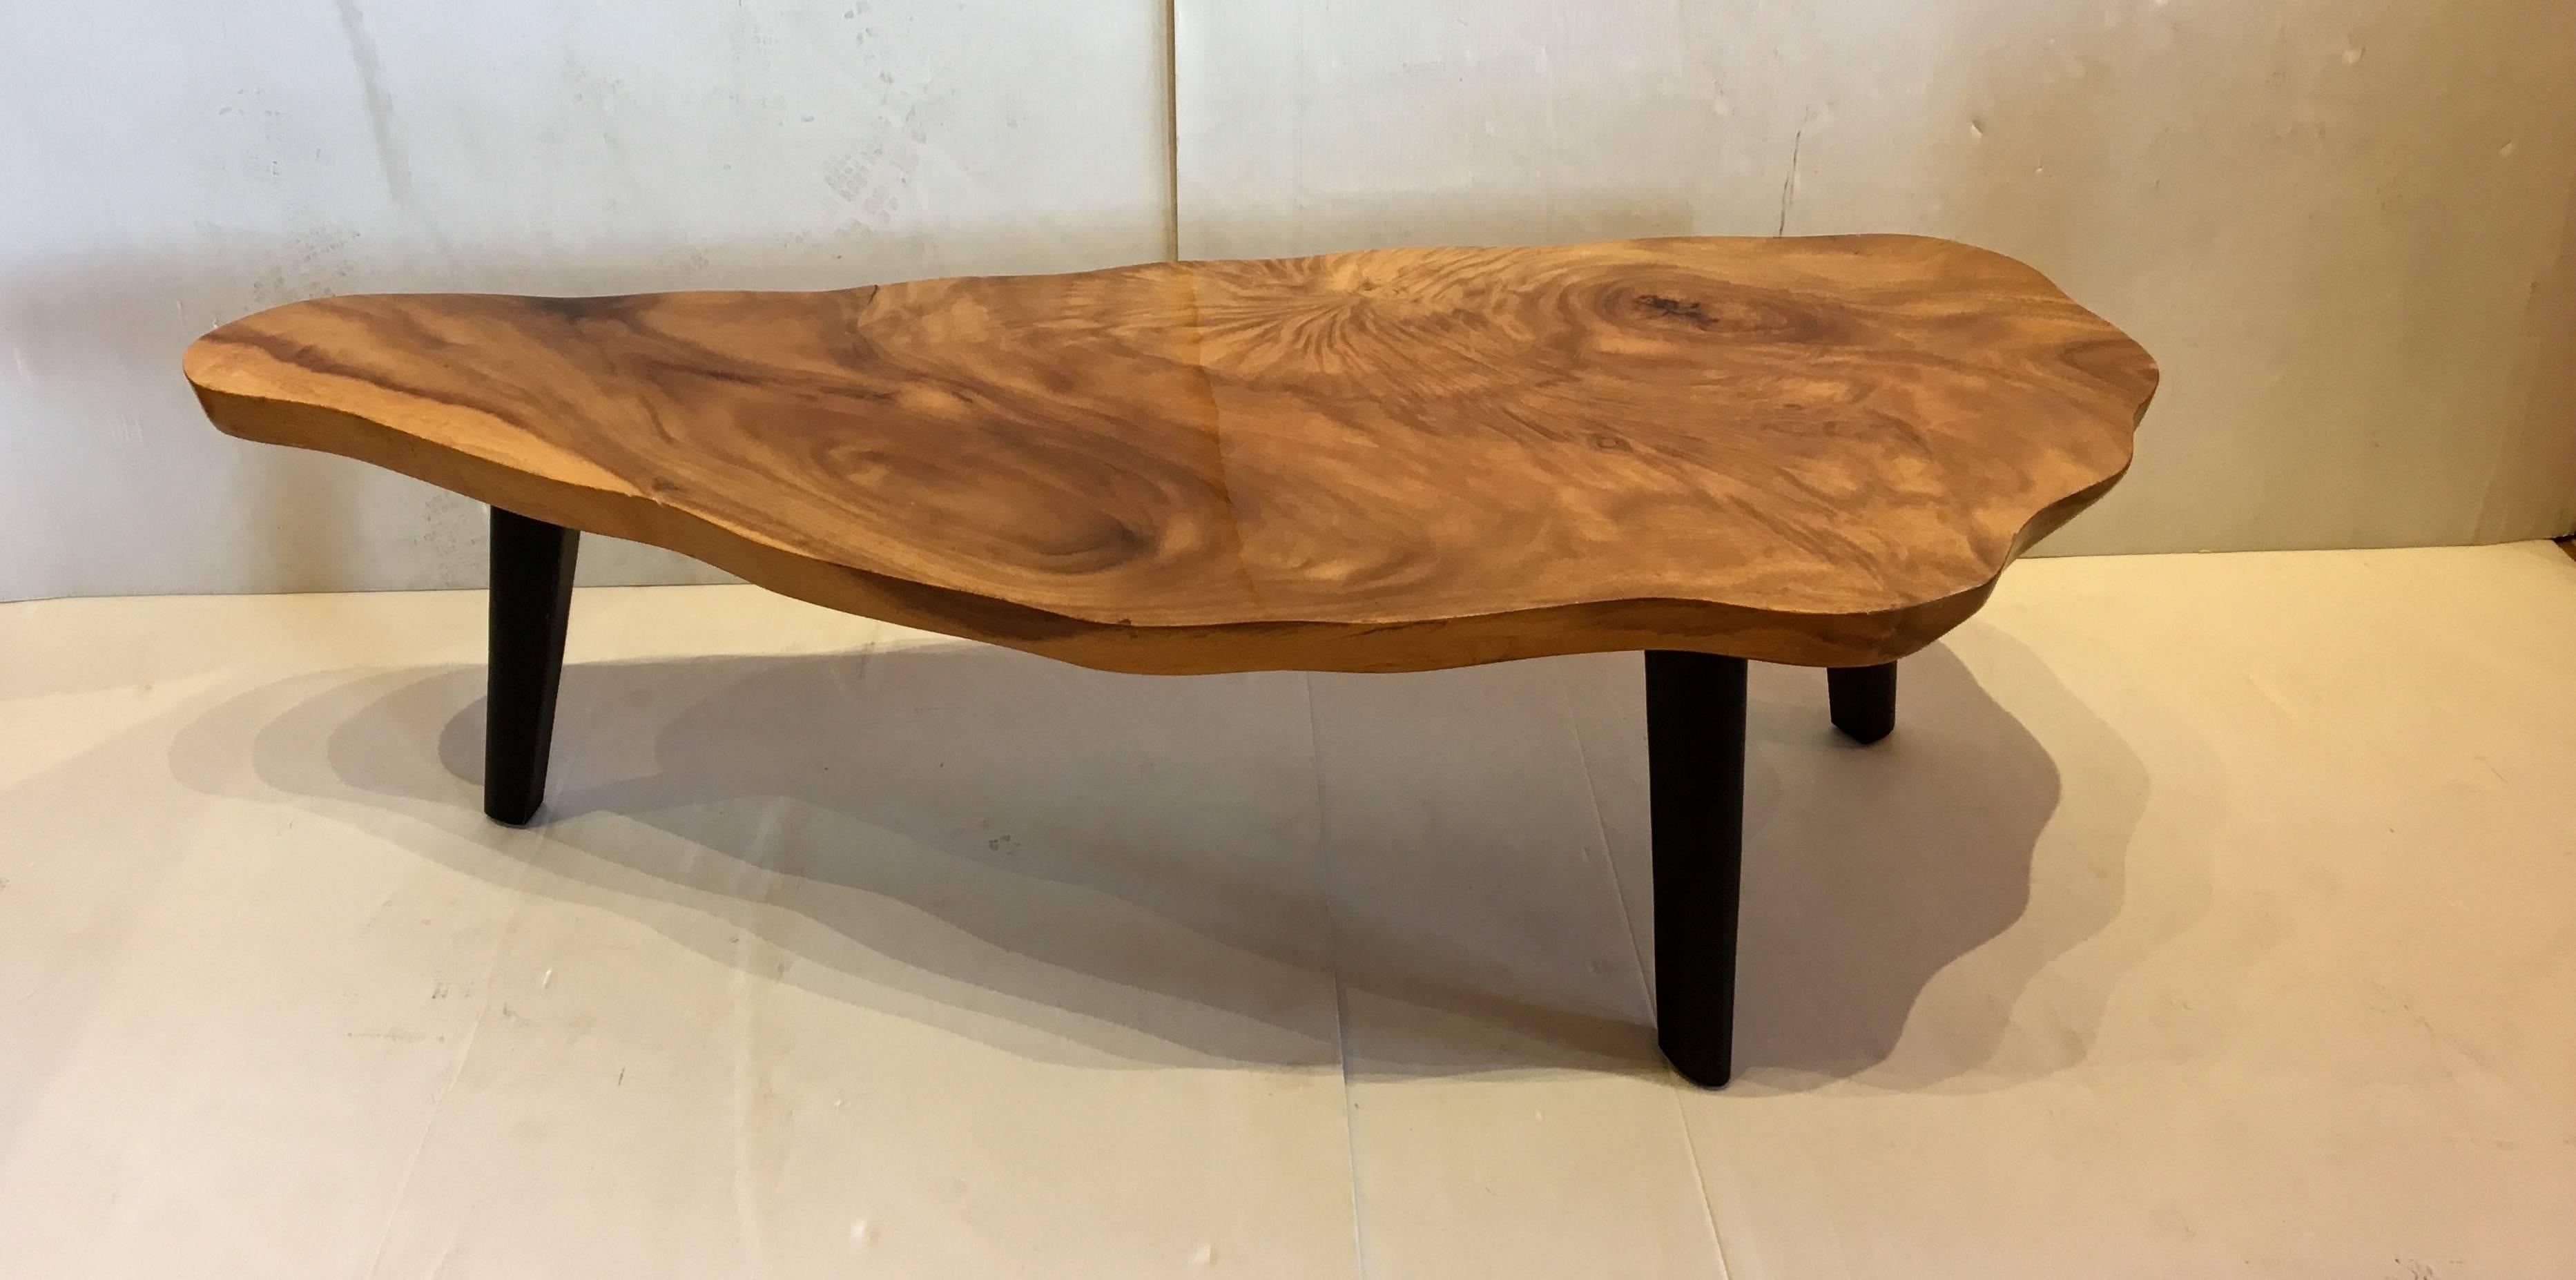 Beautiful three-legged solid Thick Koa wood, free-form coffee table, high gloss clear lacquer solid top. Sitting on three solid black lacquer legs, nice grain and unique shape very nice and clean condition.